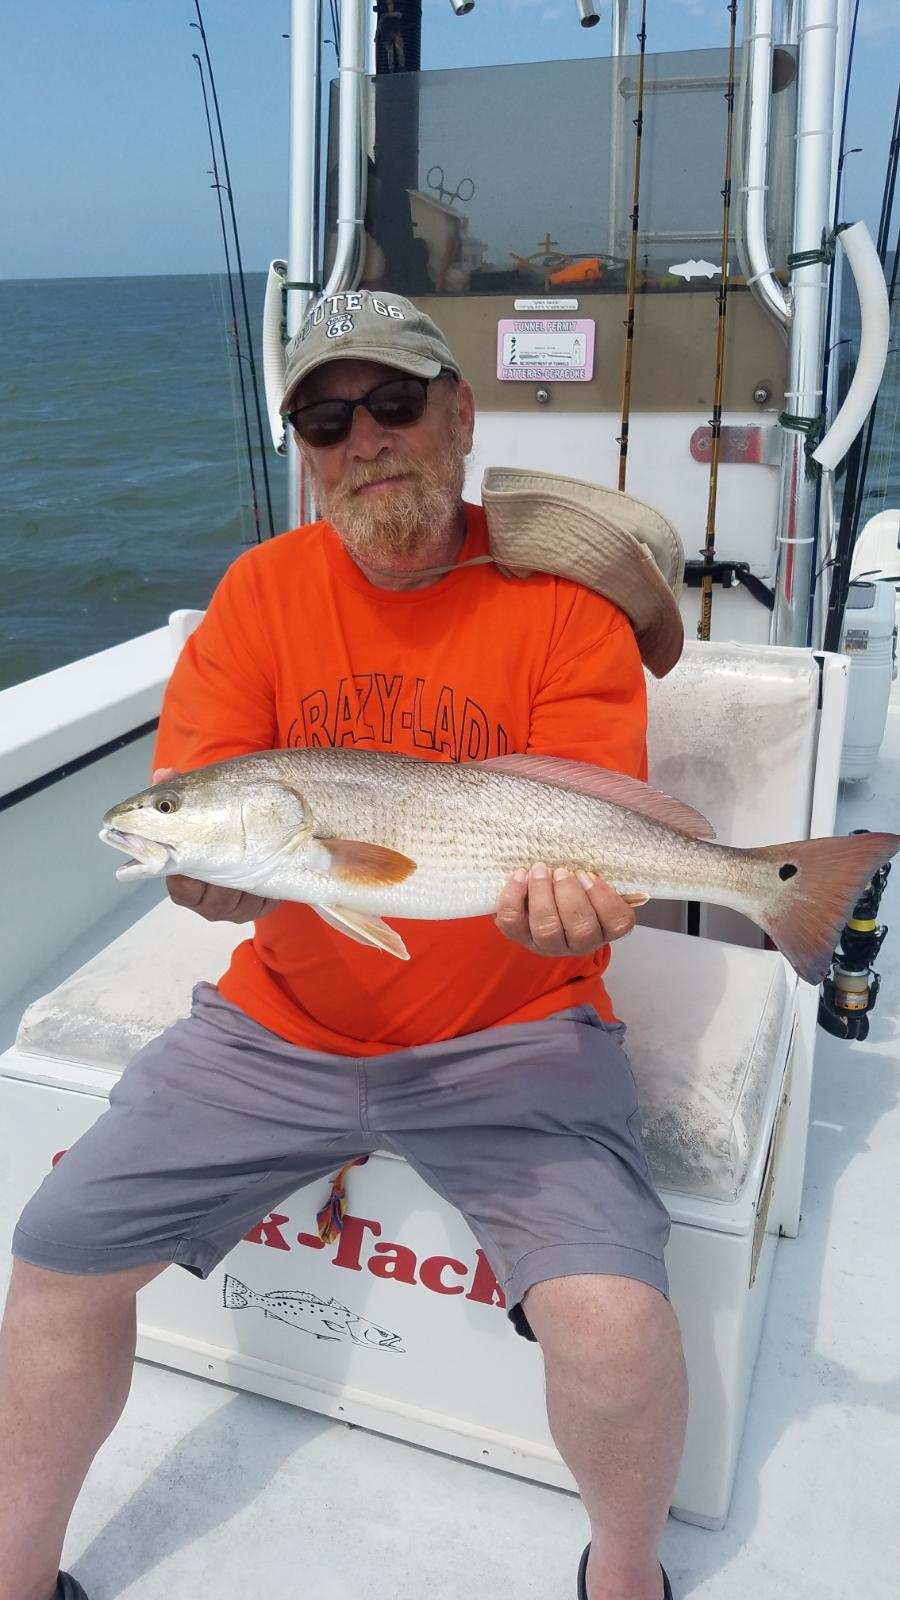 Speck-Tackler Fishing Teach's Lair Inshore Charters